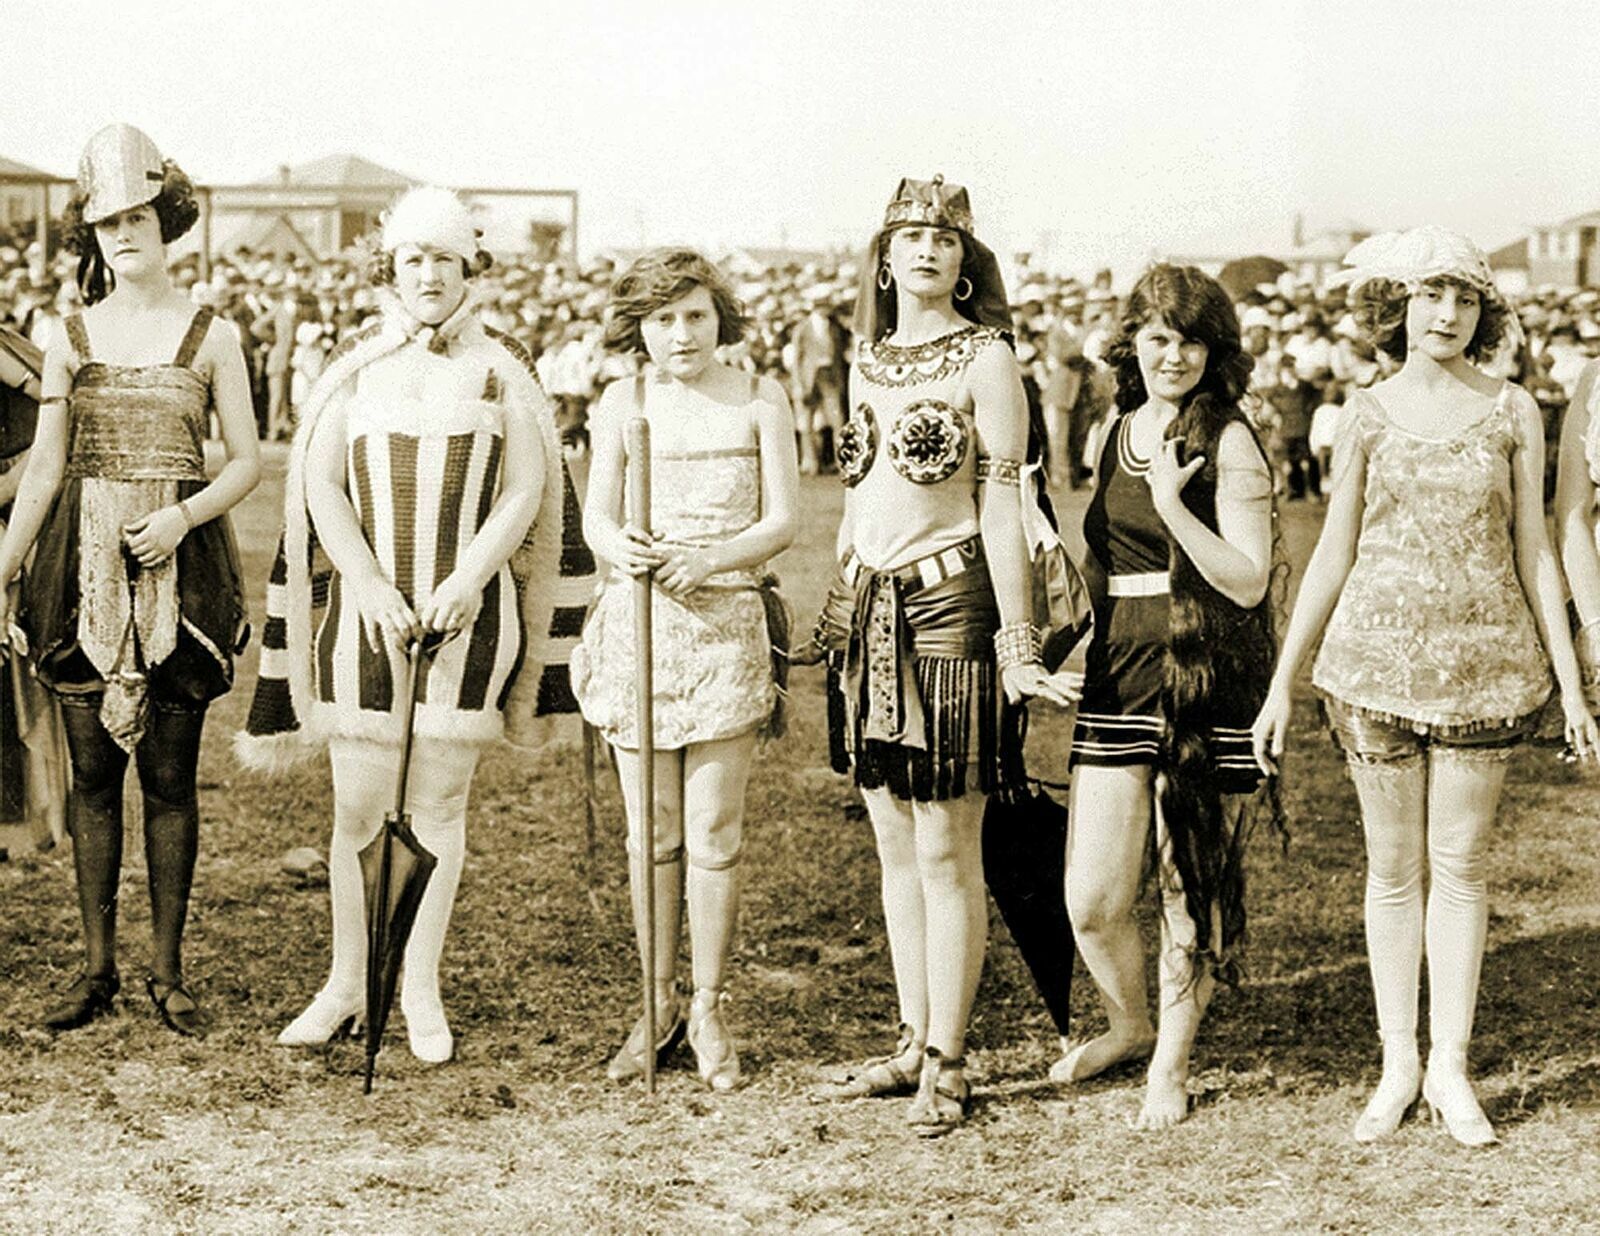 1923 Bathing Beauty Contest Galveston, TX  Old Photo Picture Reprint 8x10